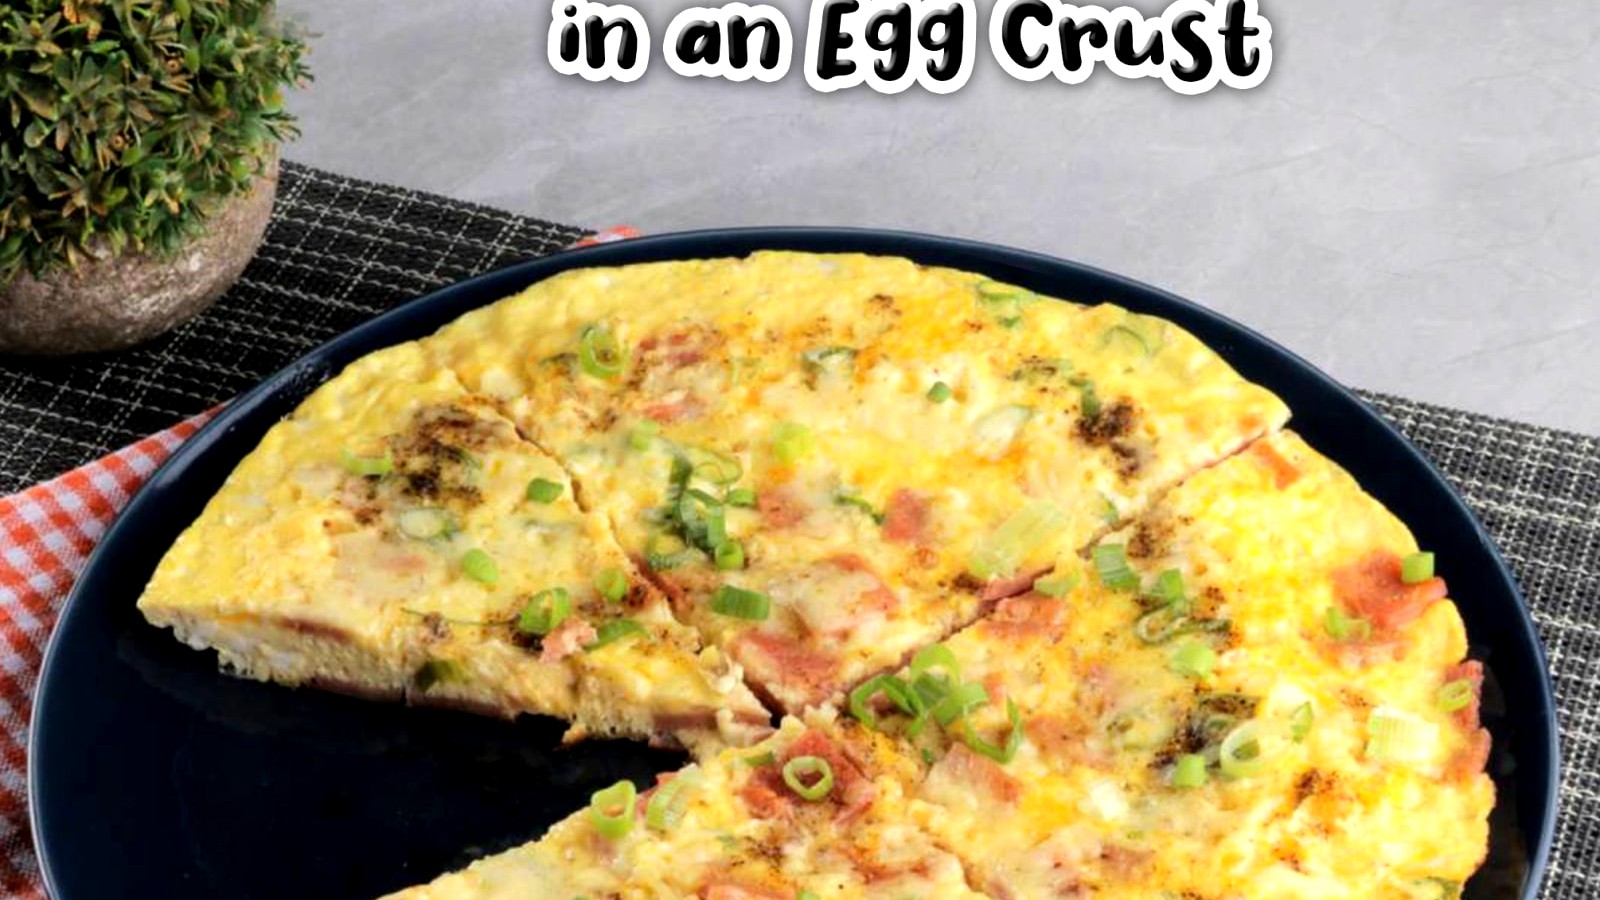 Image of Ham Pizza in an Egg Crust